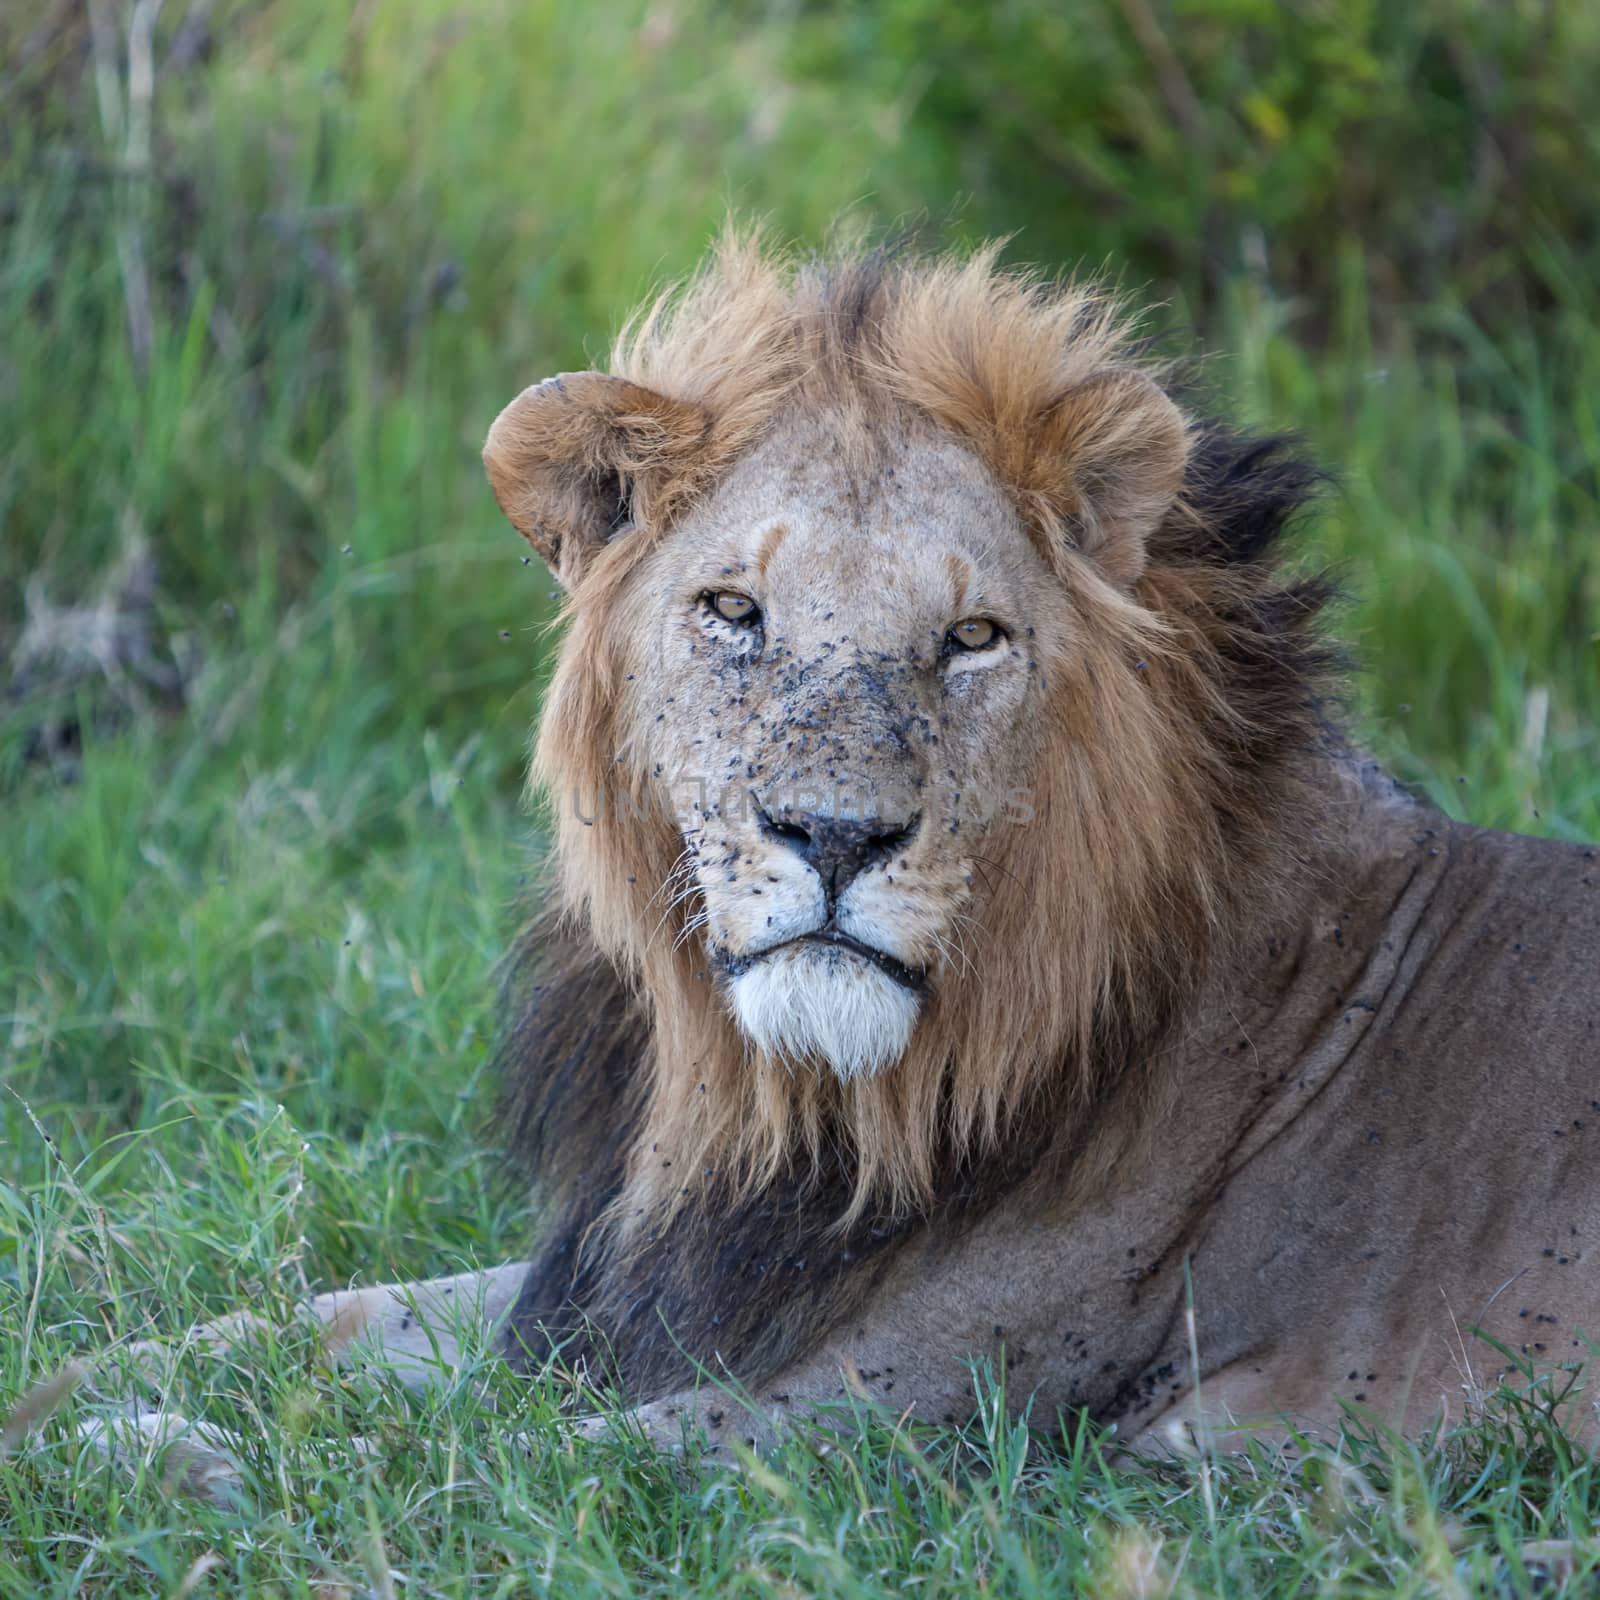 lion close up against green grass background in the savannah